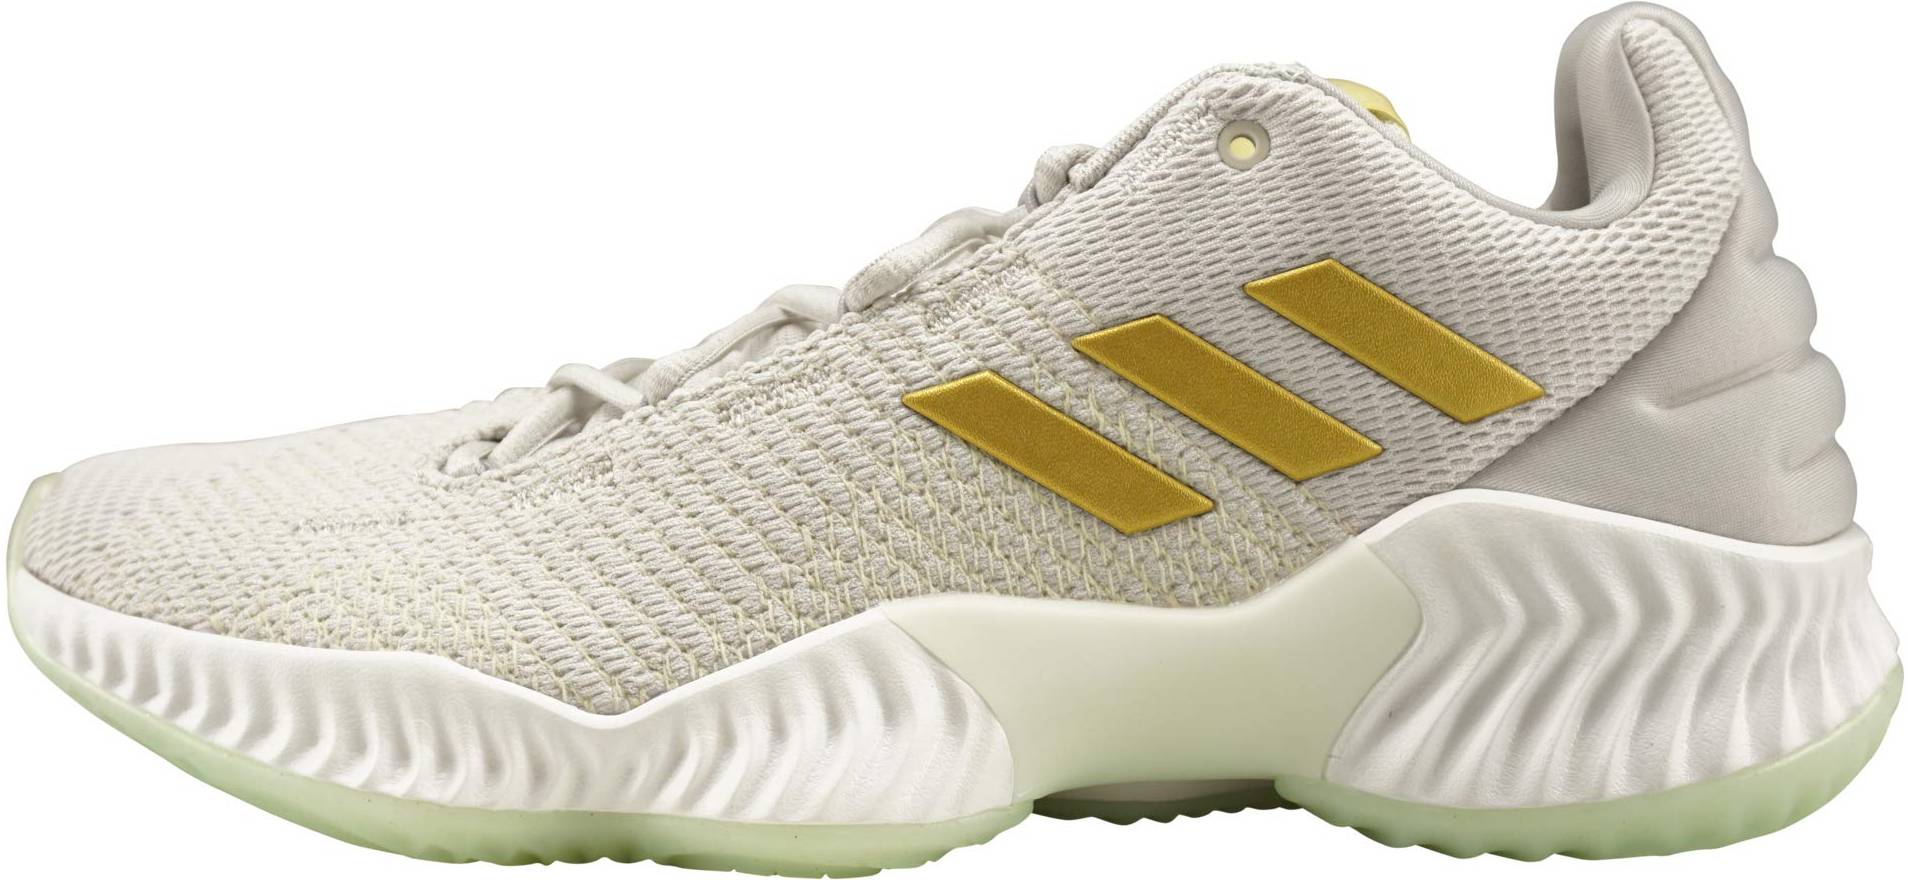 adidas men's pro bounce low 218 basketball shoes